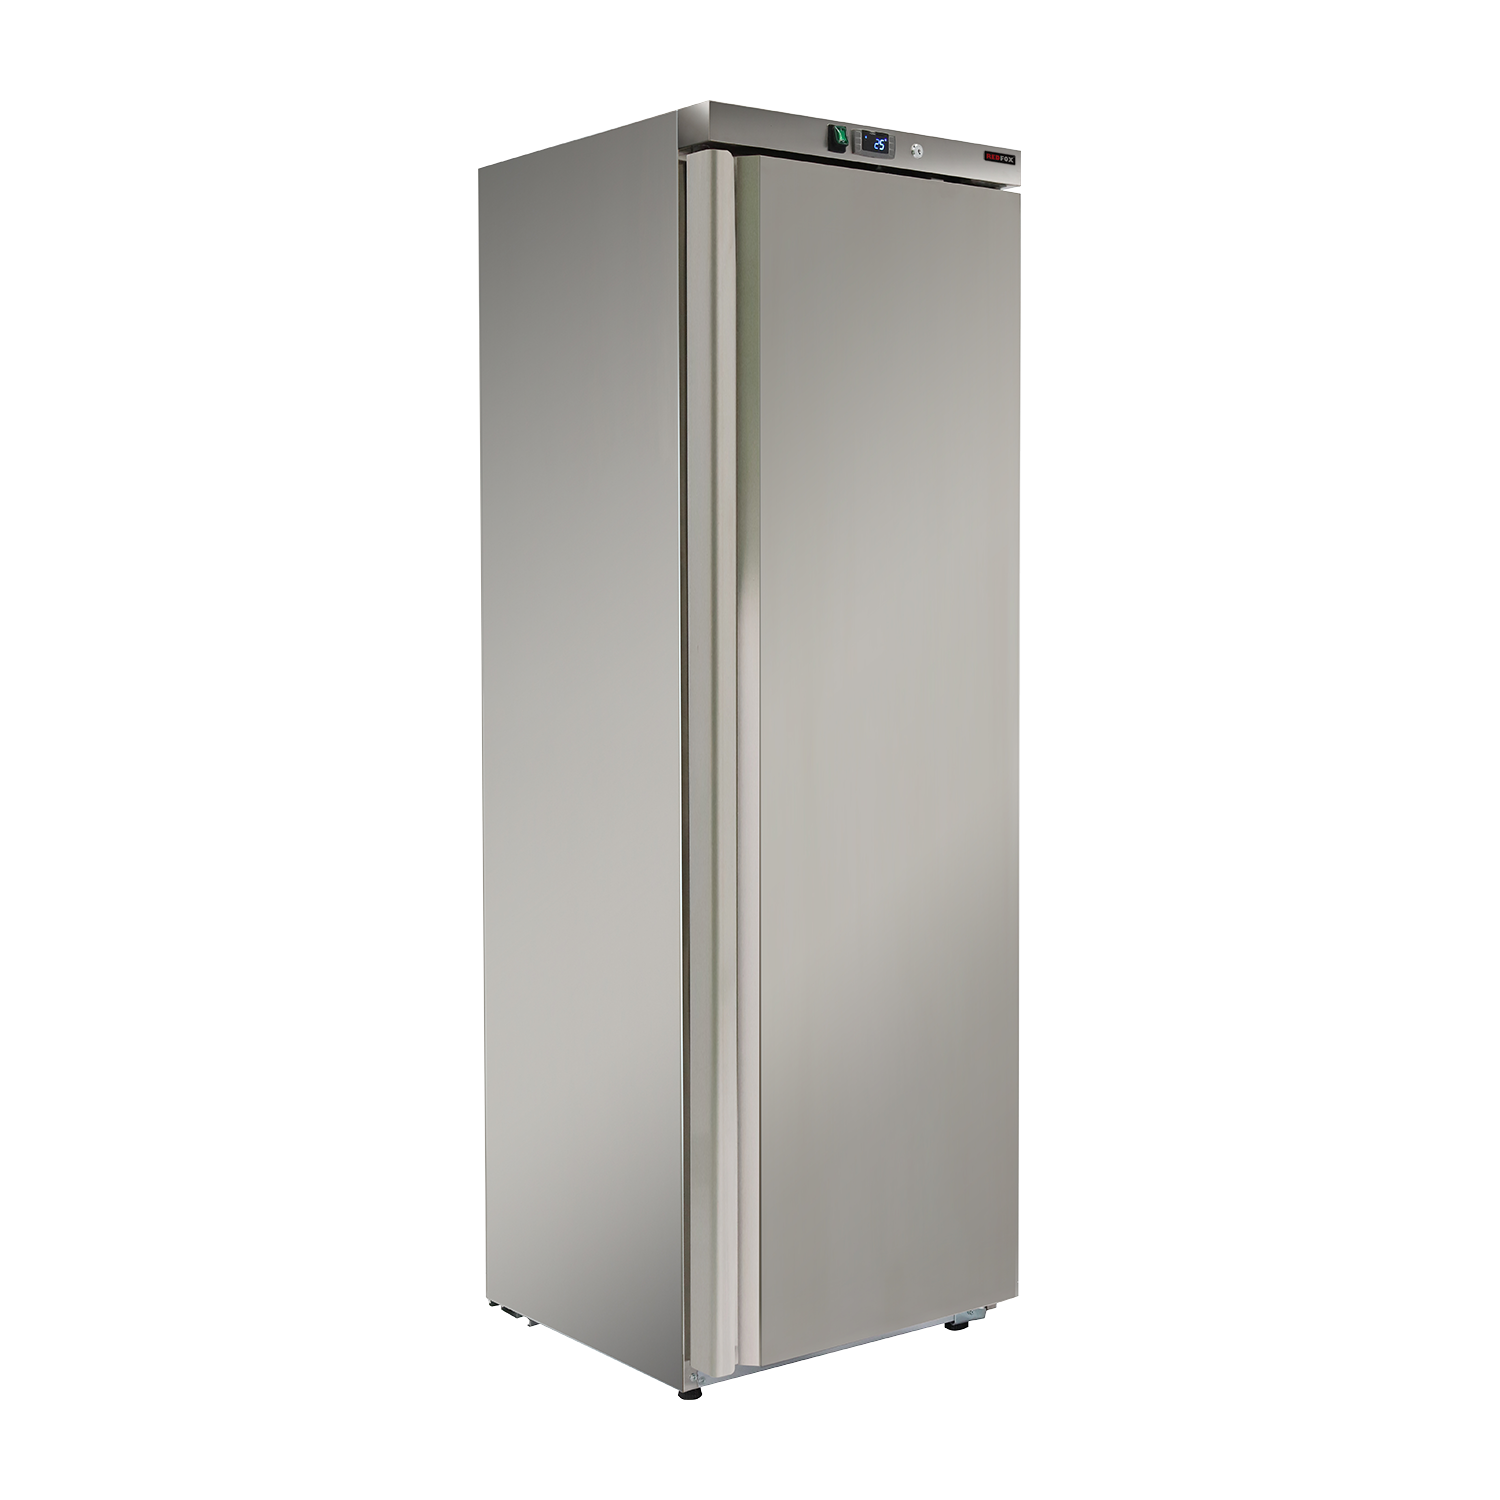 Cooling cabinet 570 l, stainless steel | REDFOX - DRR 600 S